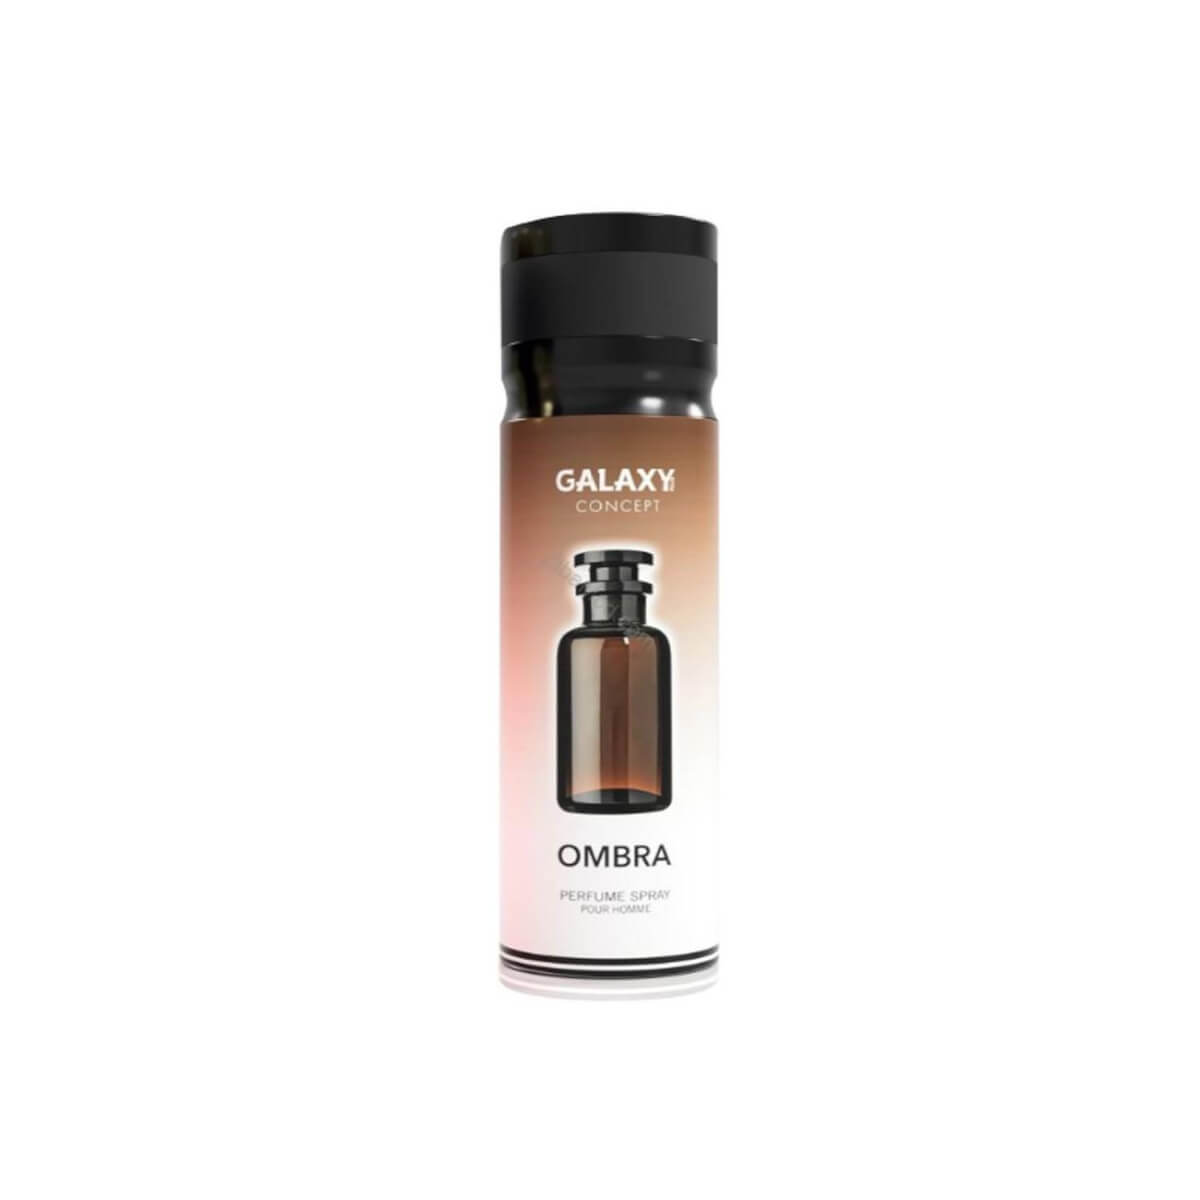 Galaxy Concept Ombra 200Ml Perfume Spray Pour Homme (Inspired By Ombre Nomade)